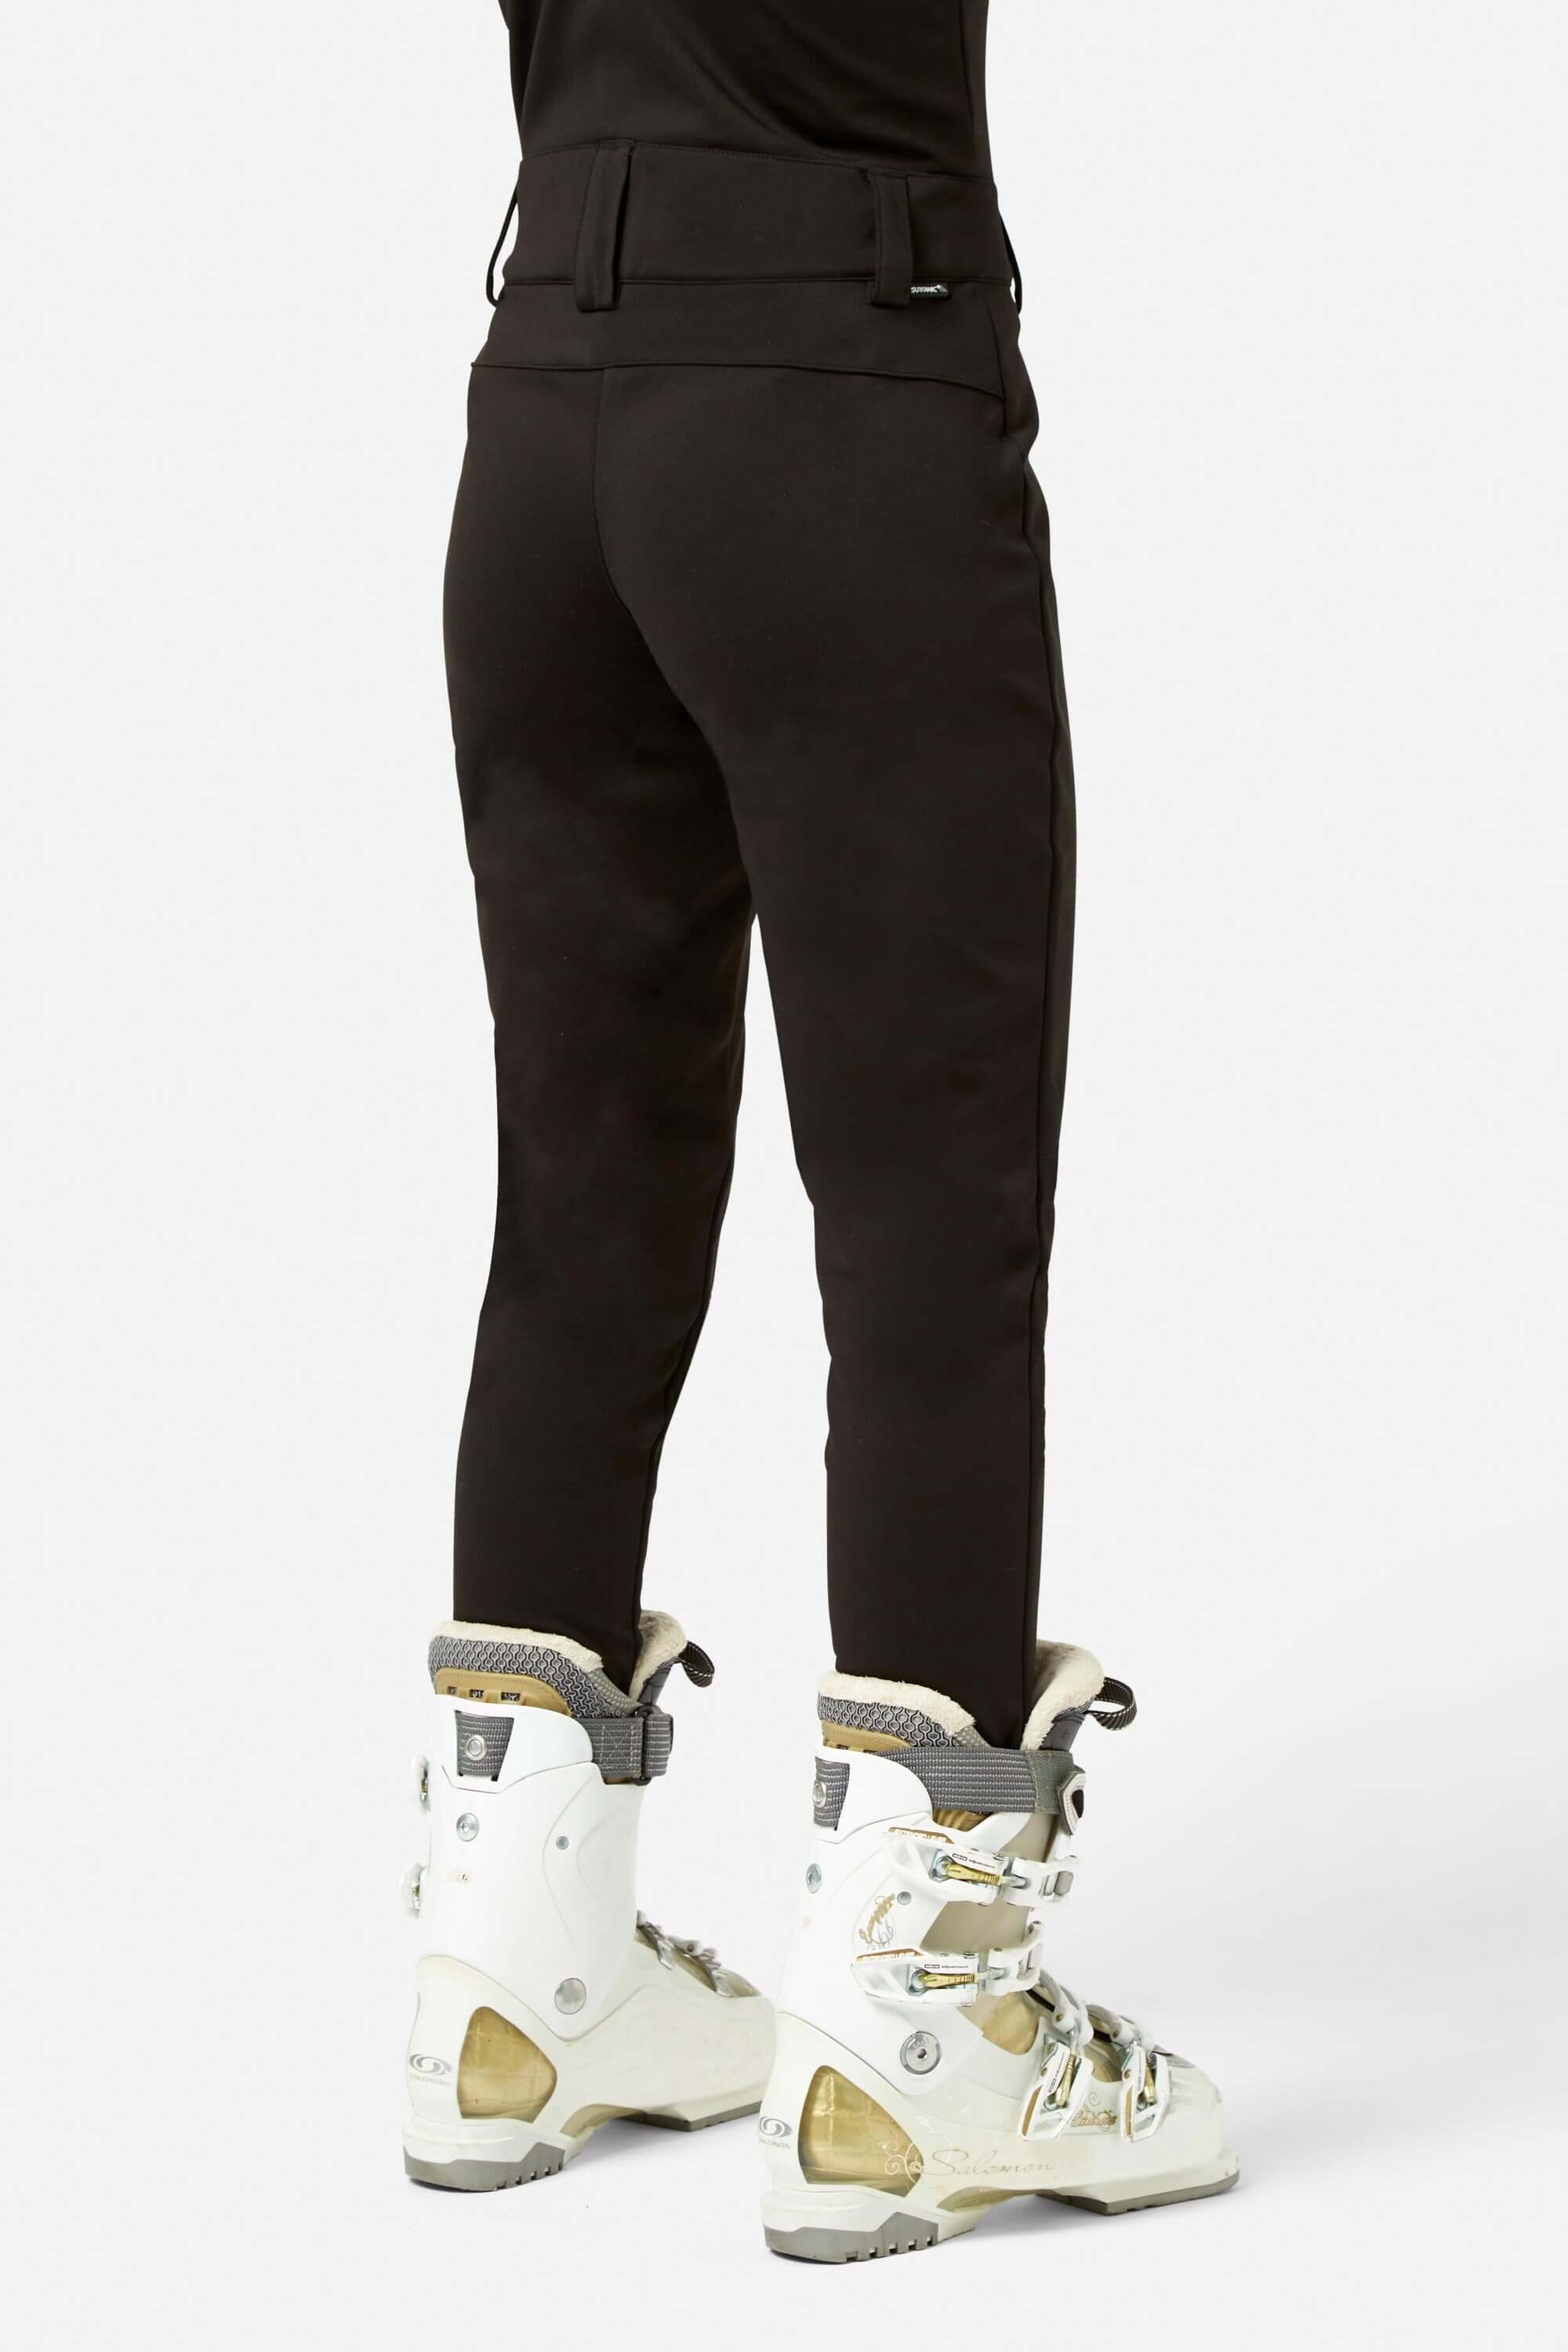 ladies skinny ski trousers - OFF-58% >Free Delivery